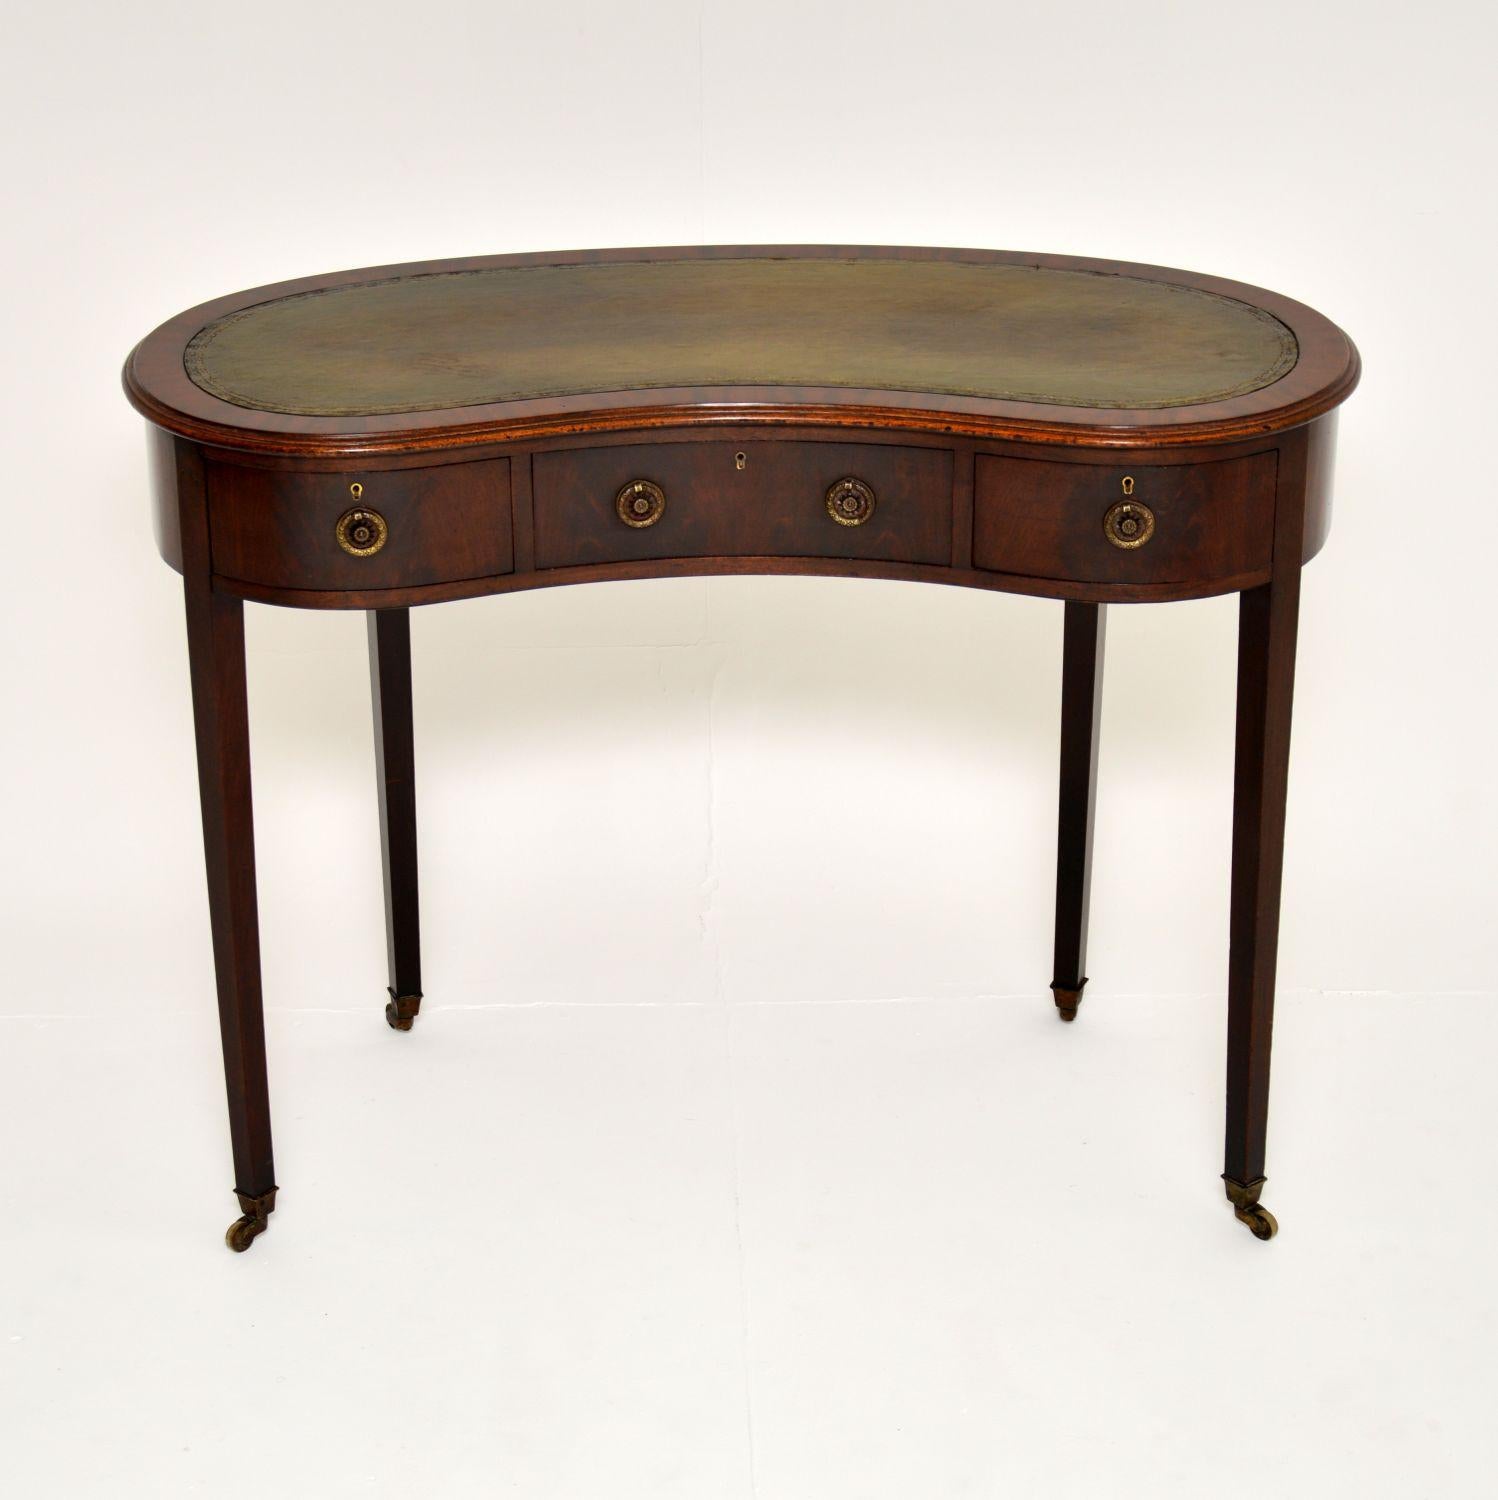 A stylish and elegant antique Edwardian kidney shaped desk. This was made in England, it dates from the 1900-1910 period.

The quality is fantastic, this is beautifully designed and looks great from all angles. The top has a striking kidney shape